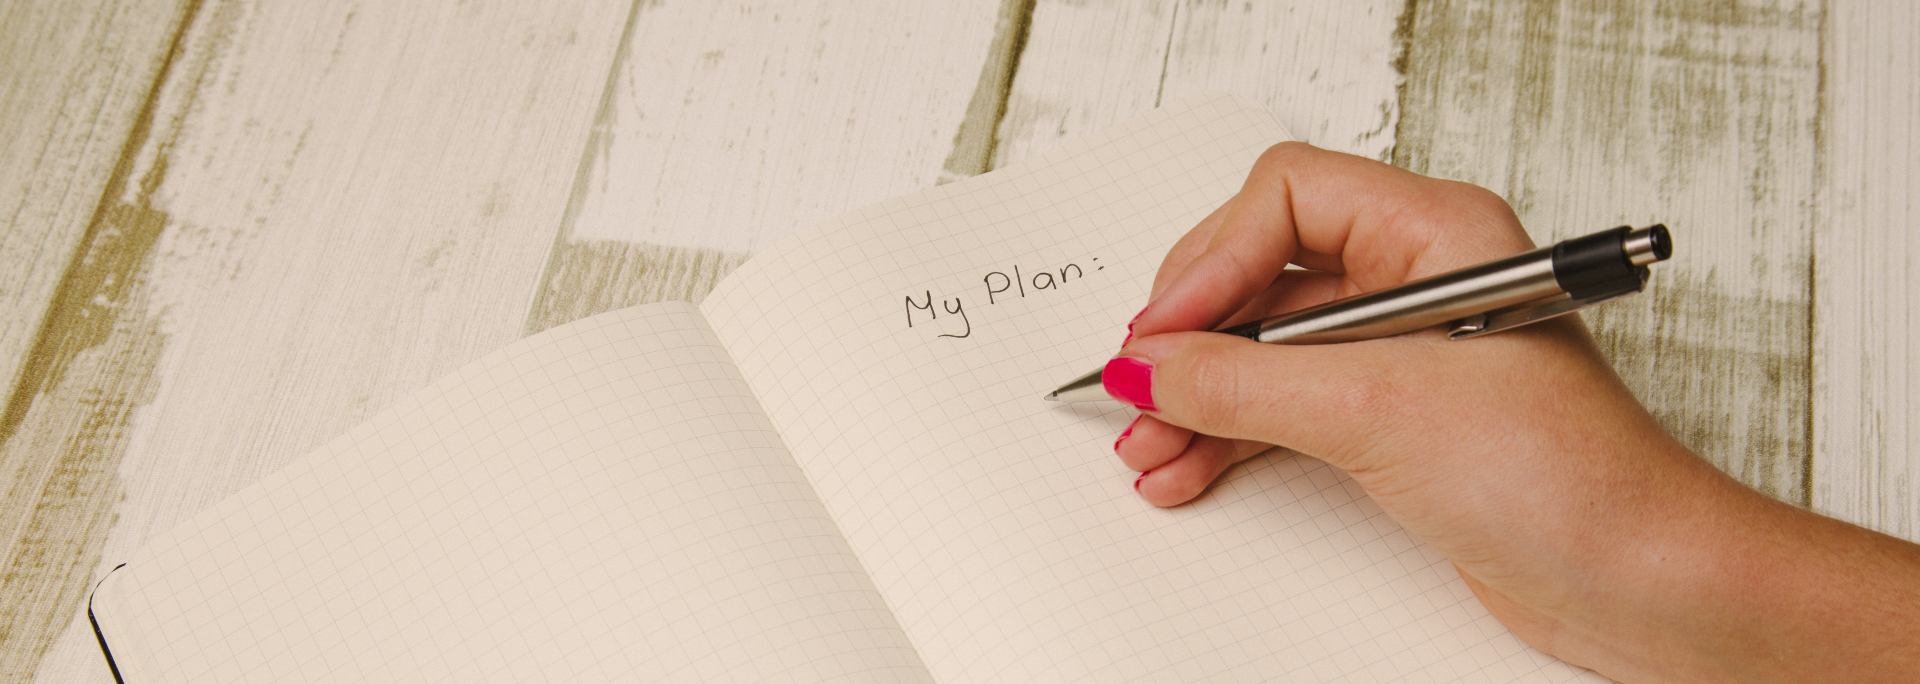 A planner is on a desk, opened to a page that has "My Plan:" handwritten. A women's hand is visible and is about to write on the page.